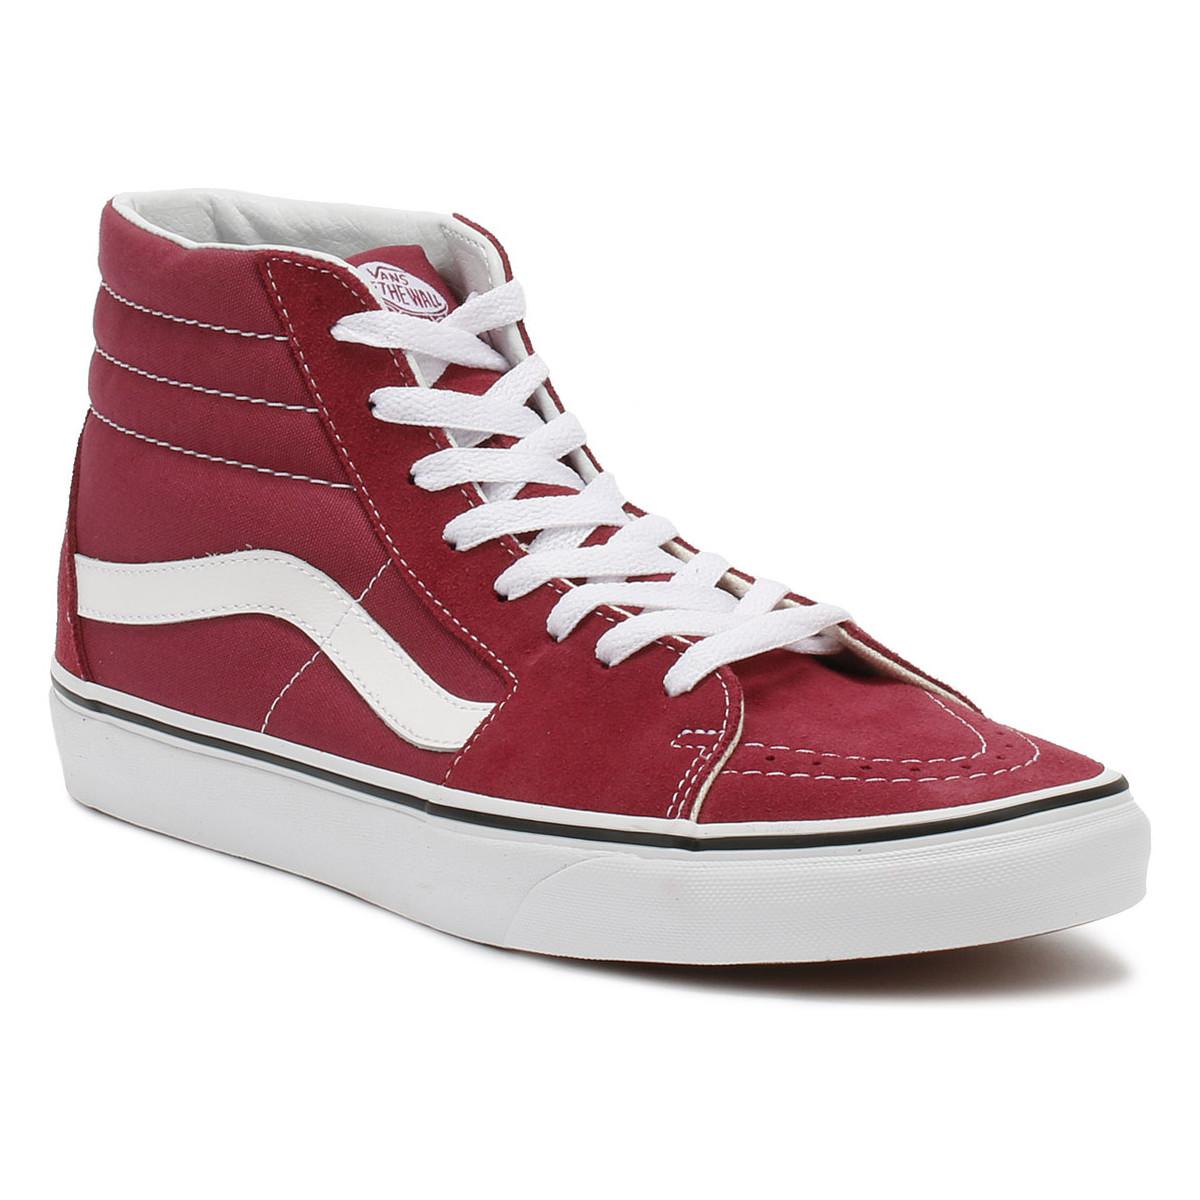 red and white high top vans